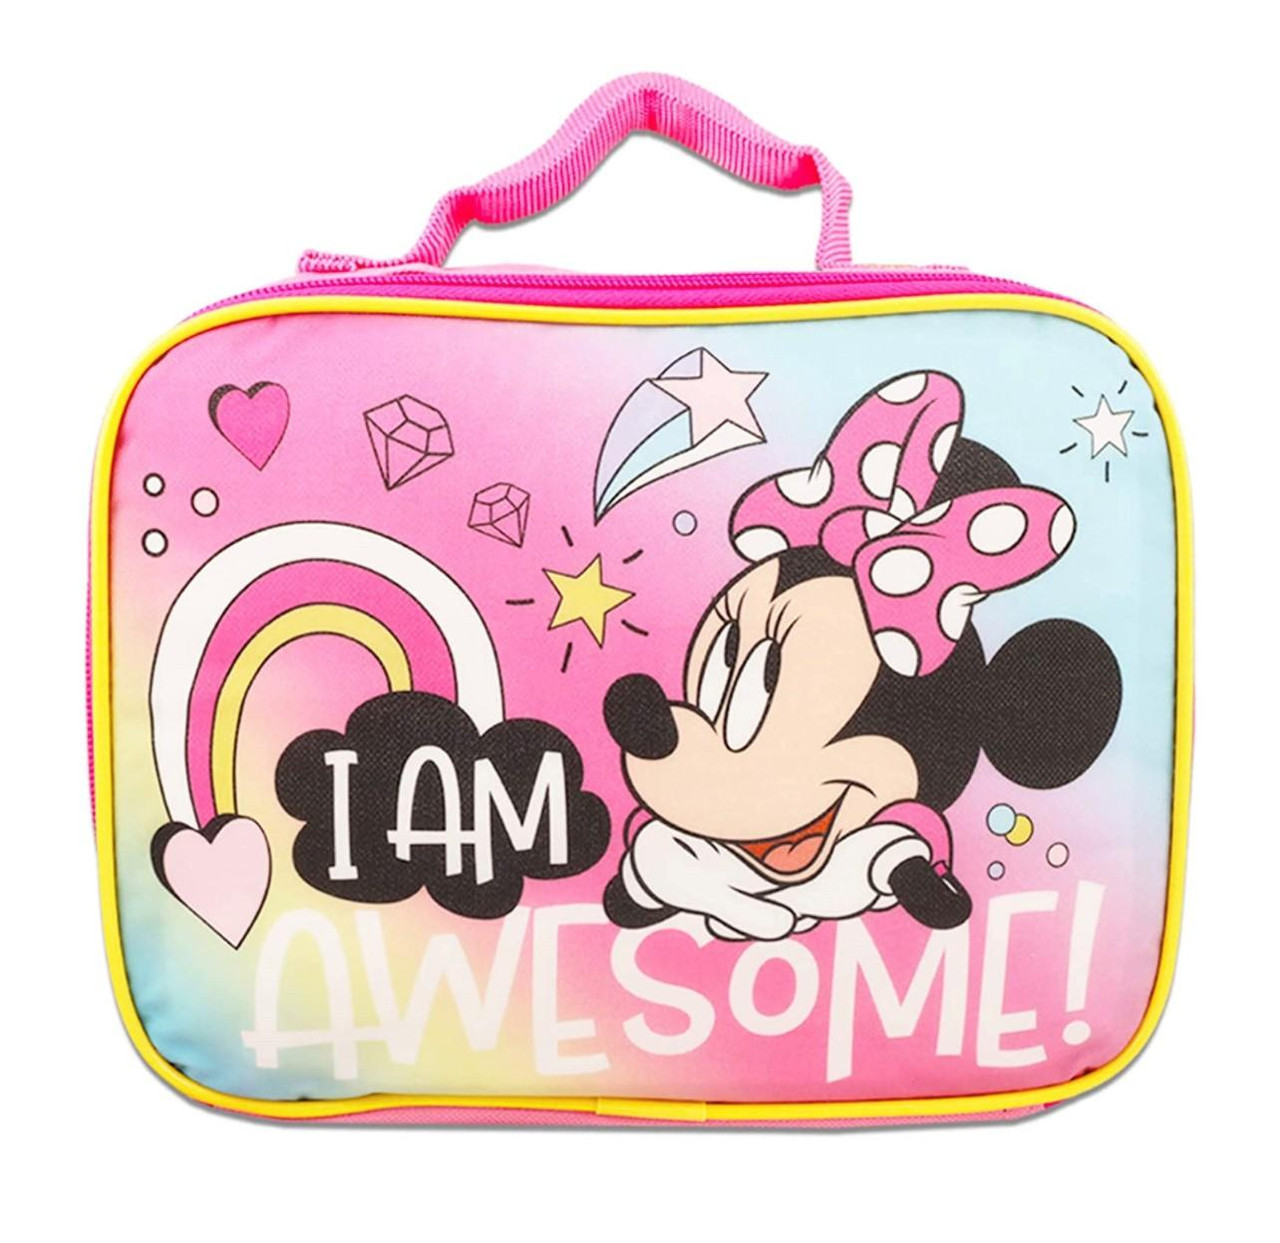 https://cdn11.bigcommerce.com/s-31ycg3ui3f/images/stencil/1280x1280/products/1409/4461/Minnie_Mouse_Backpack_with_Lunch_Bag_4__43033.1660063133.jpg?c=1?imbypass=on